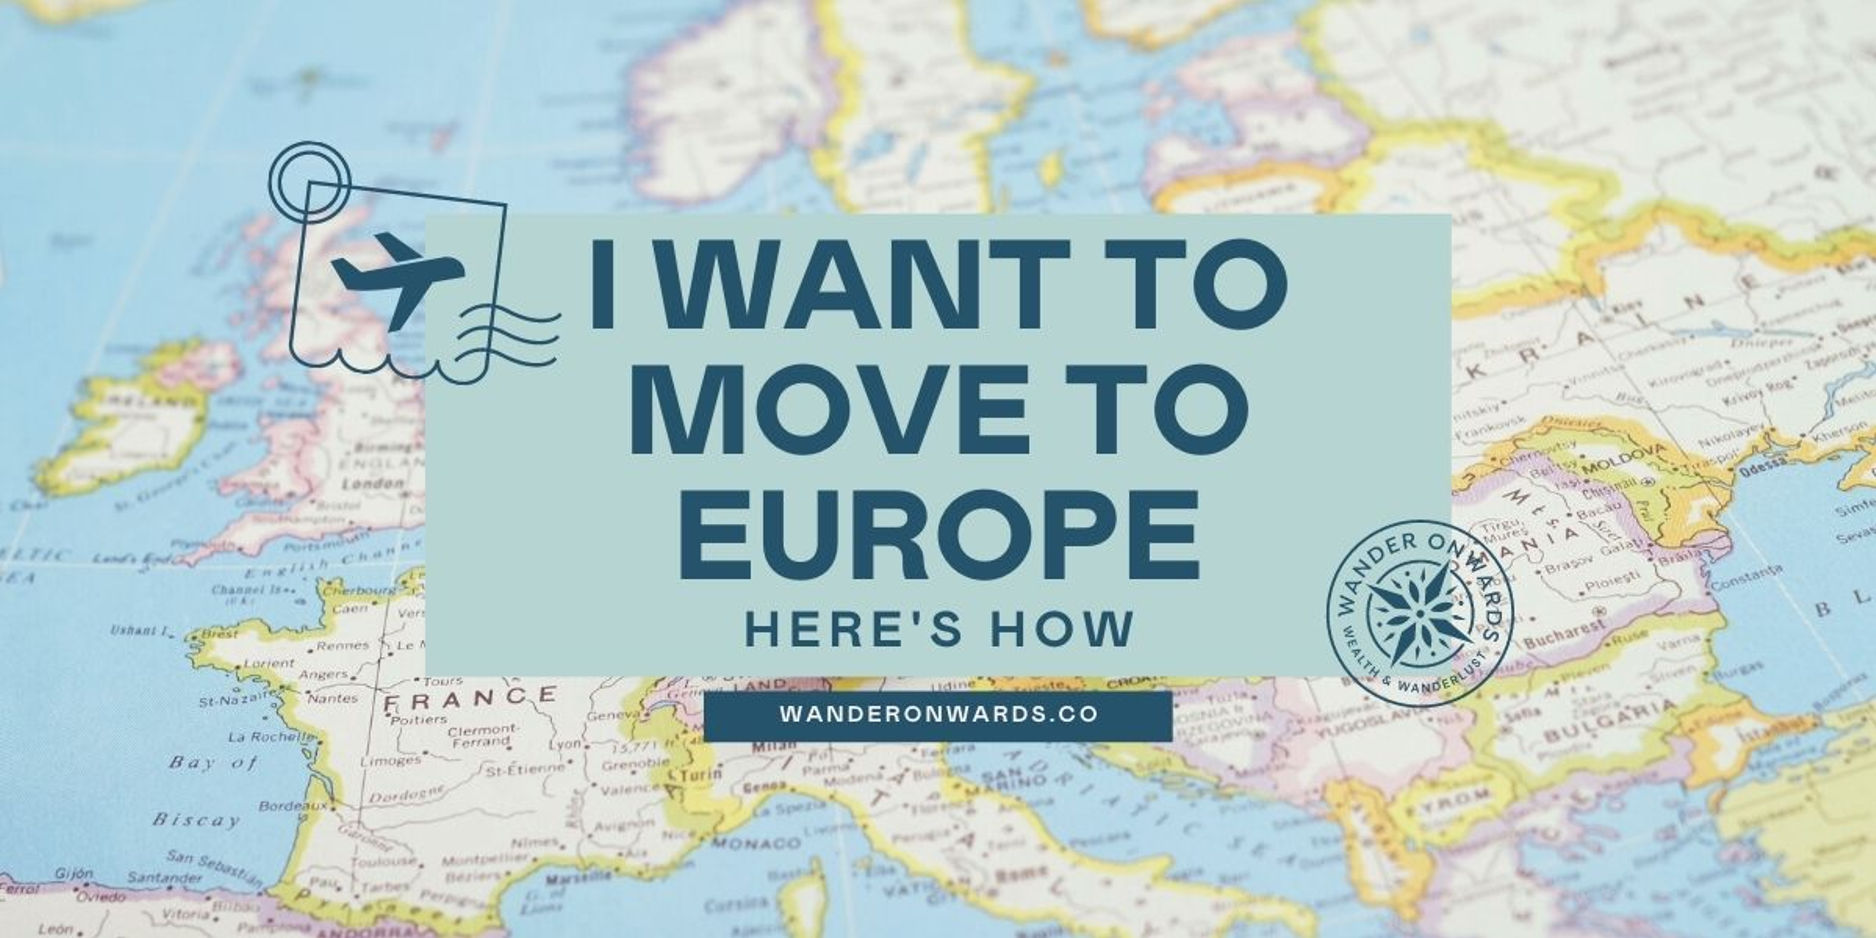 Thinking “I Want to Move to Europe”? Here’s How